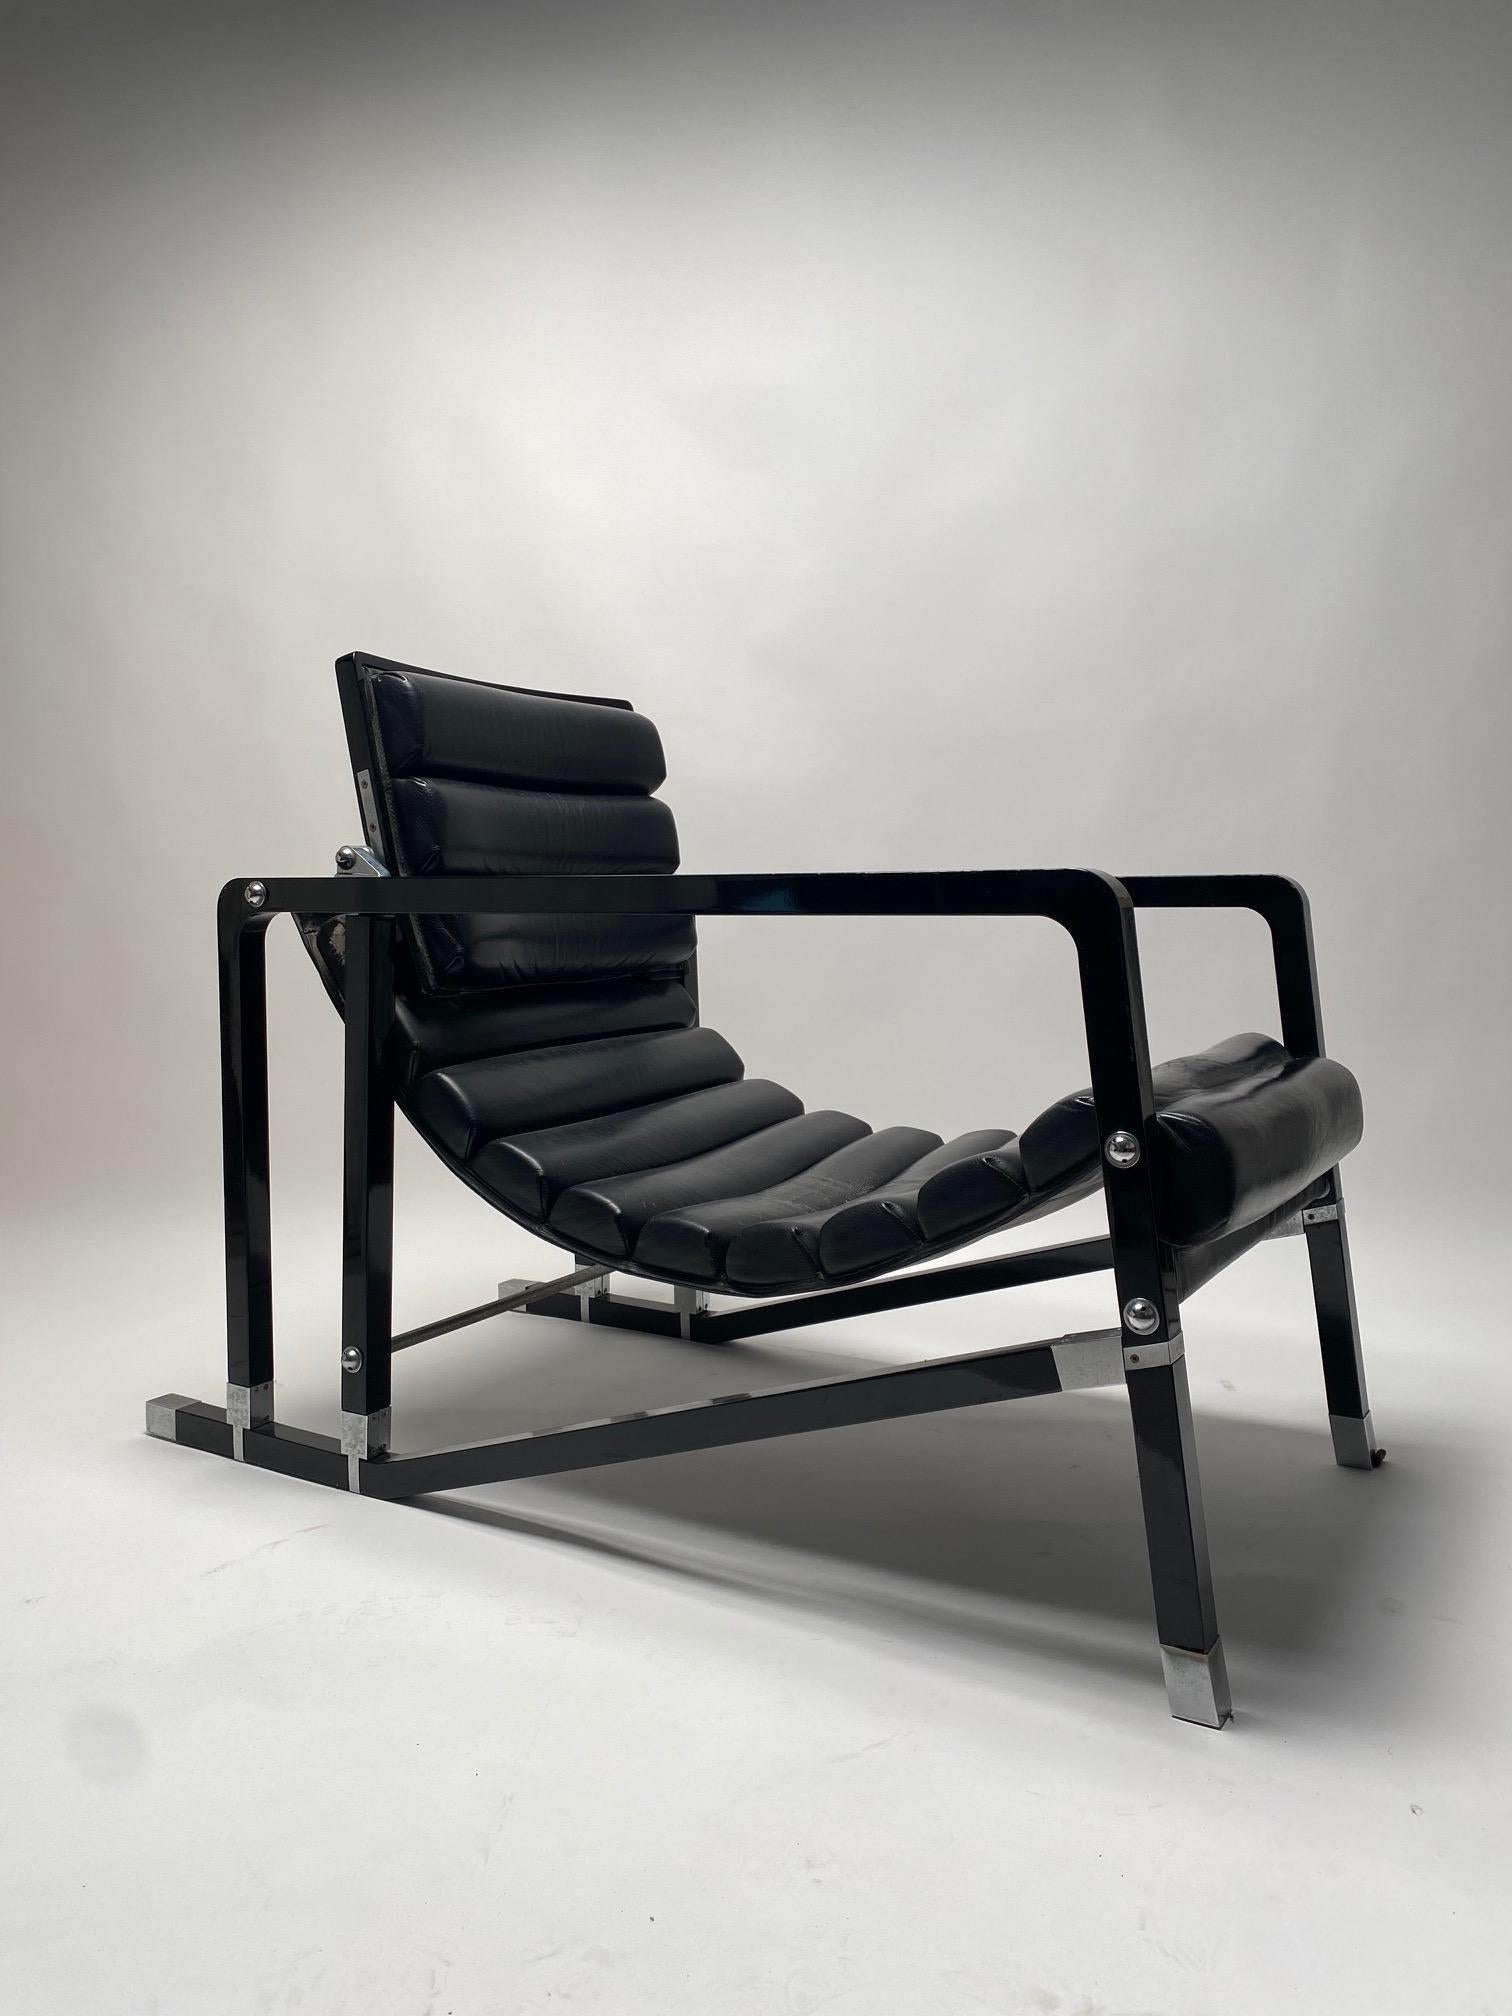 Eileen Grey, Black leather lounge chair, model Transat, 1970s. 
Black lacquered wood, brushed metal, black leather.